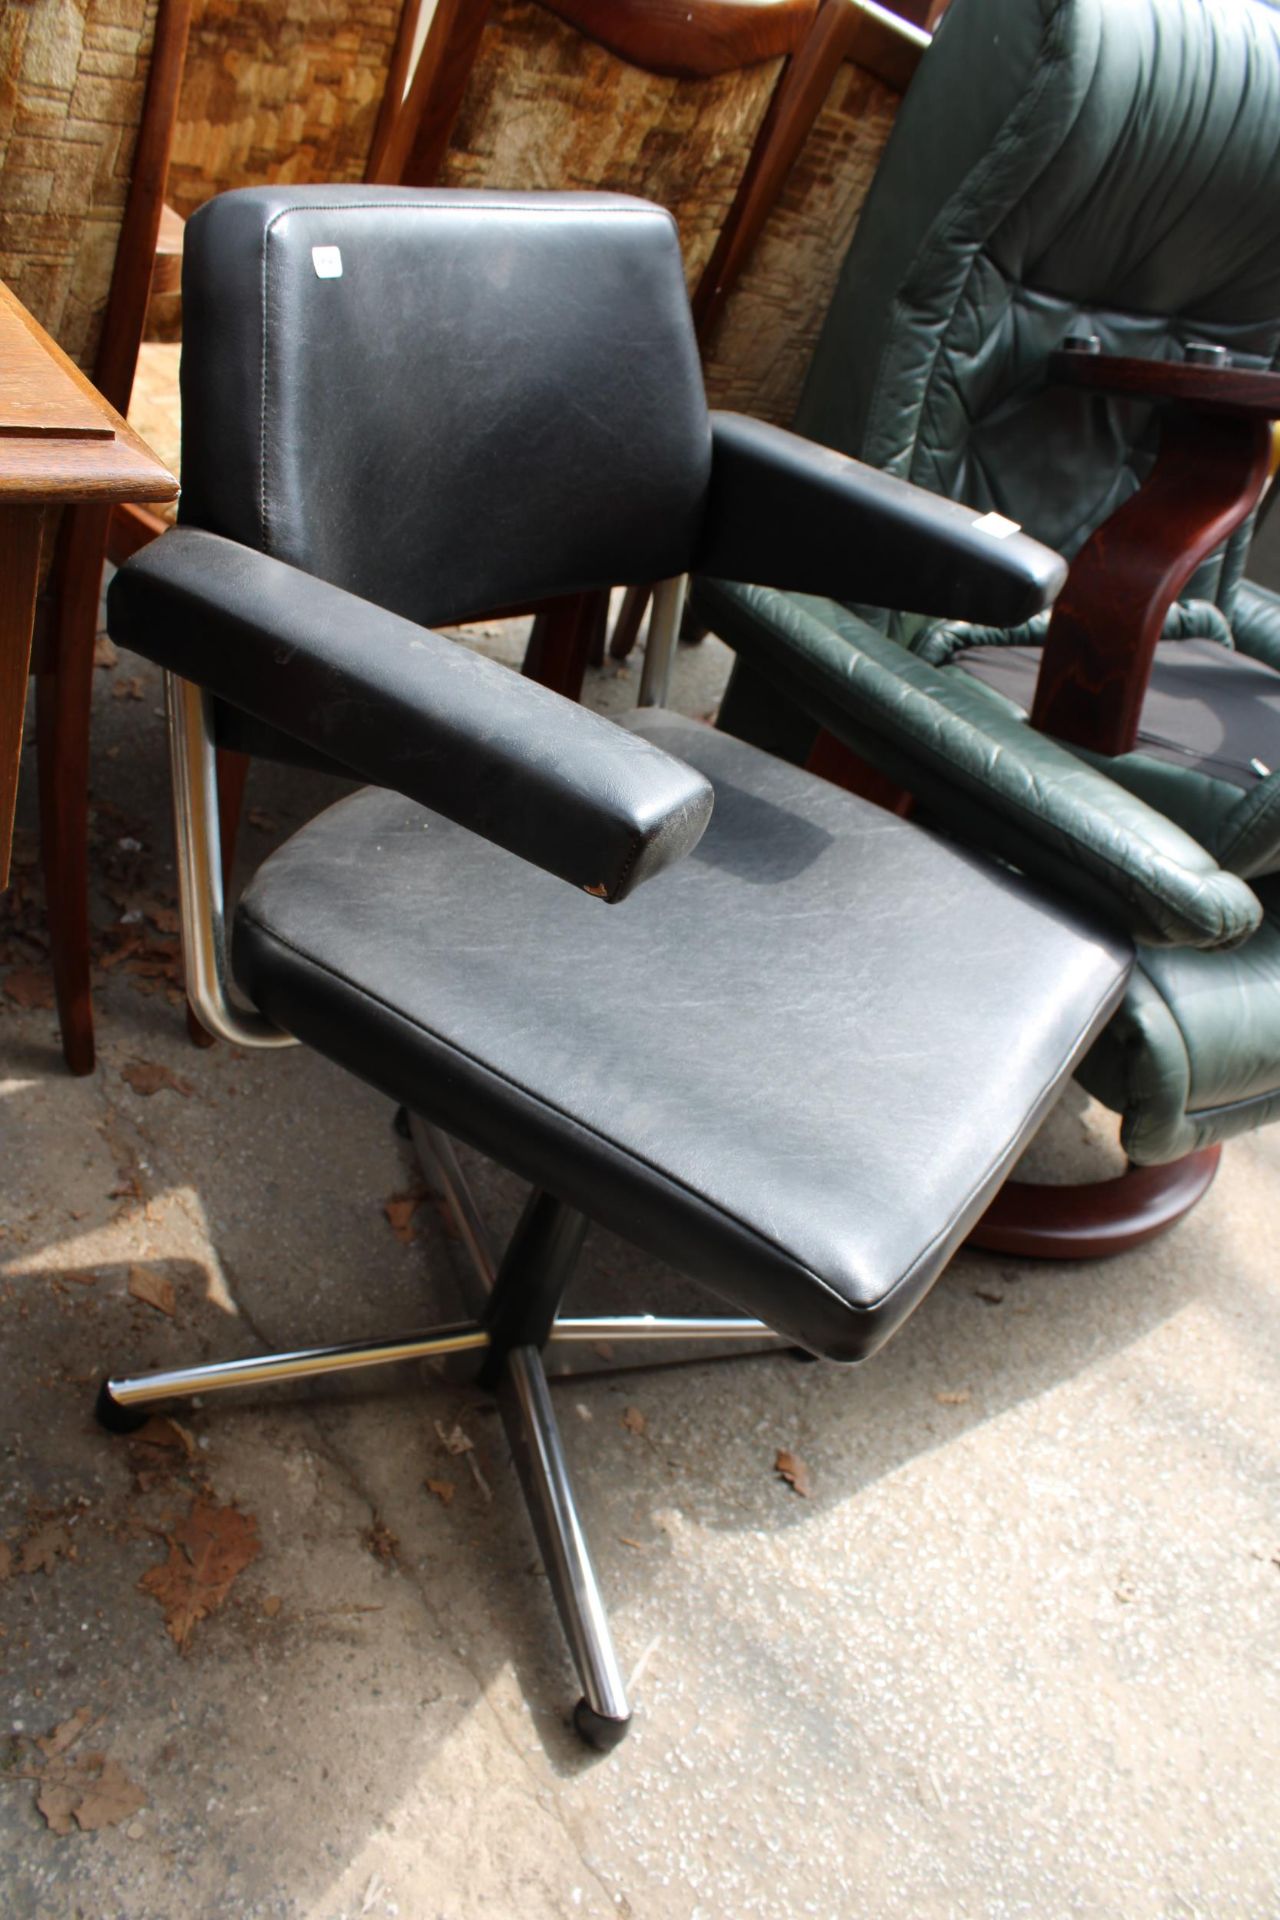 A MODERN BLACK FAUX LEATHER SWIVEL DESK CHAIR ON METAL FRAME - Image 2 of 2